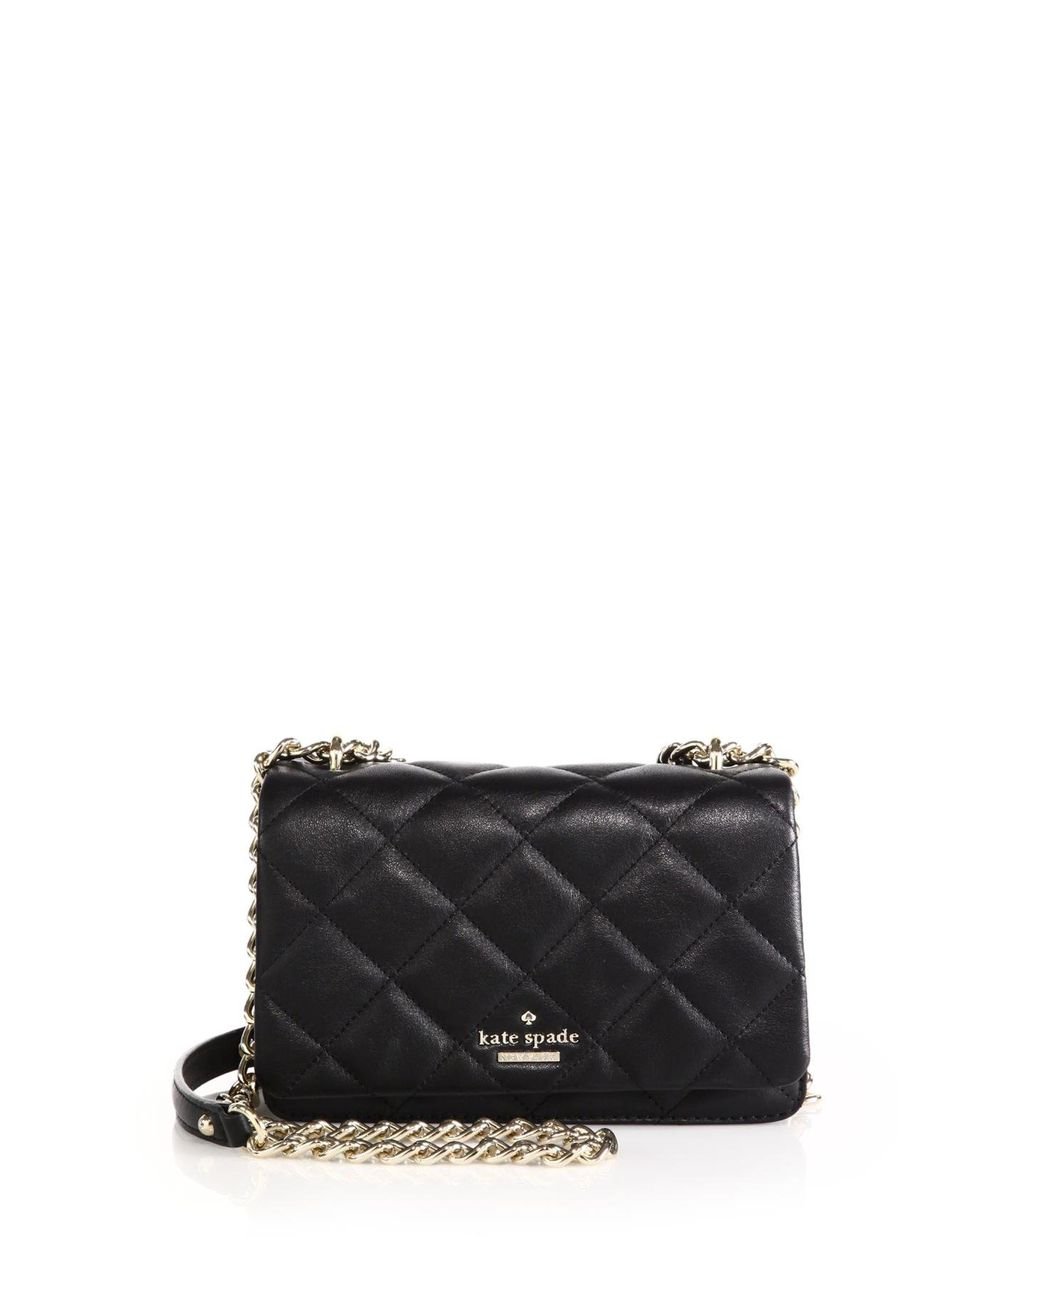 Kate Spade Emerson Place Vivenna Quilted Leather Crossbody Bag in Black |  Lyst